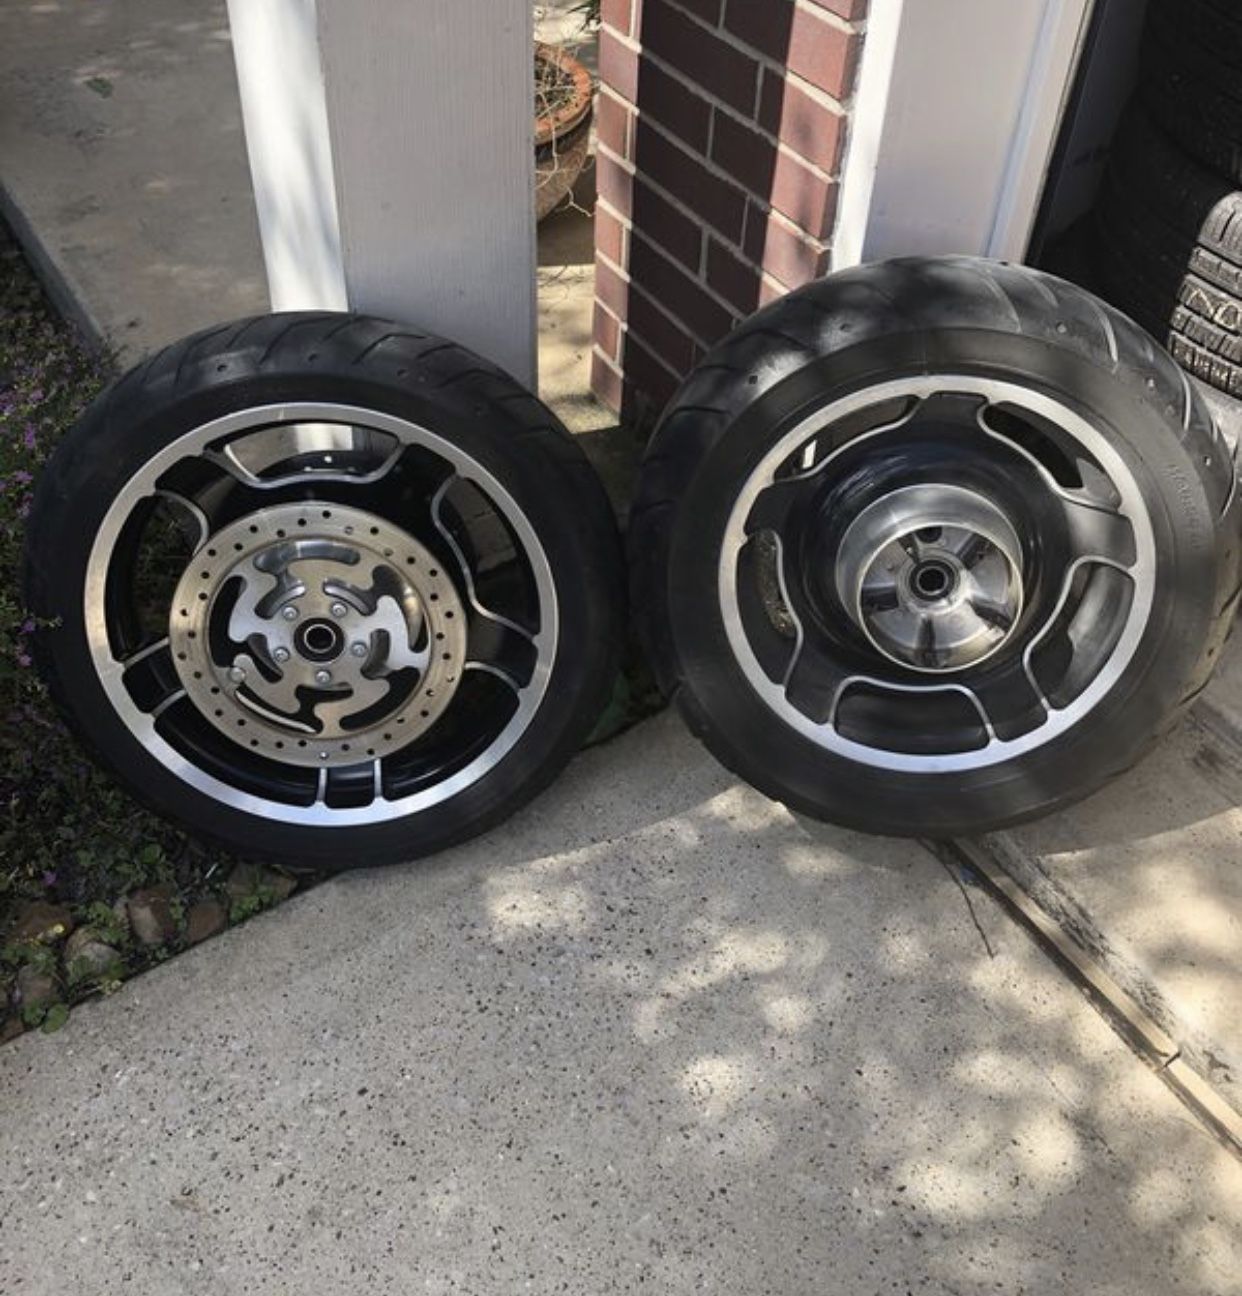 Set of wheels and tires from my motorcycle 2010 Harley-Davidson